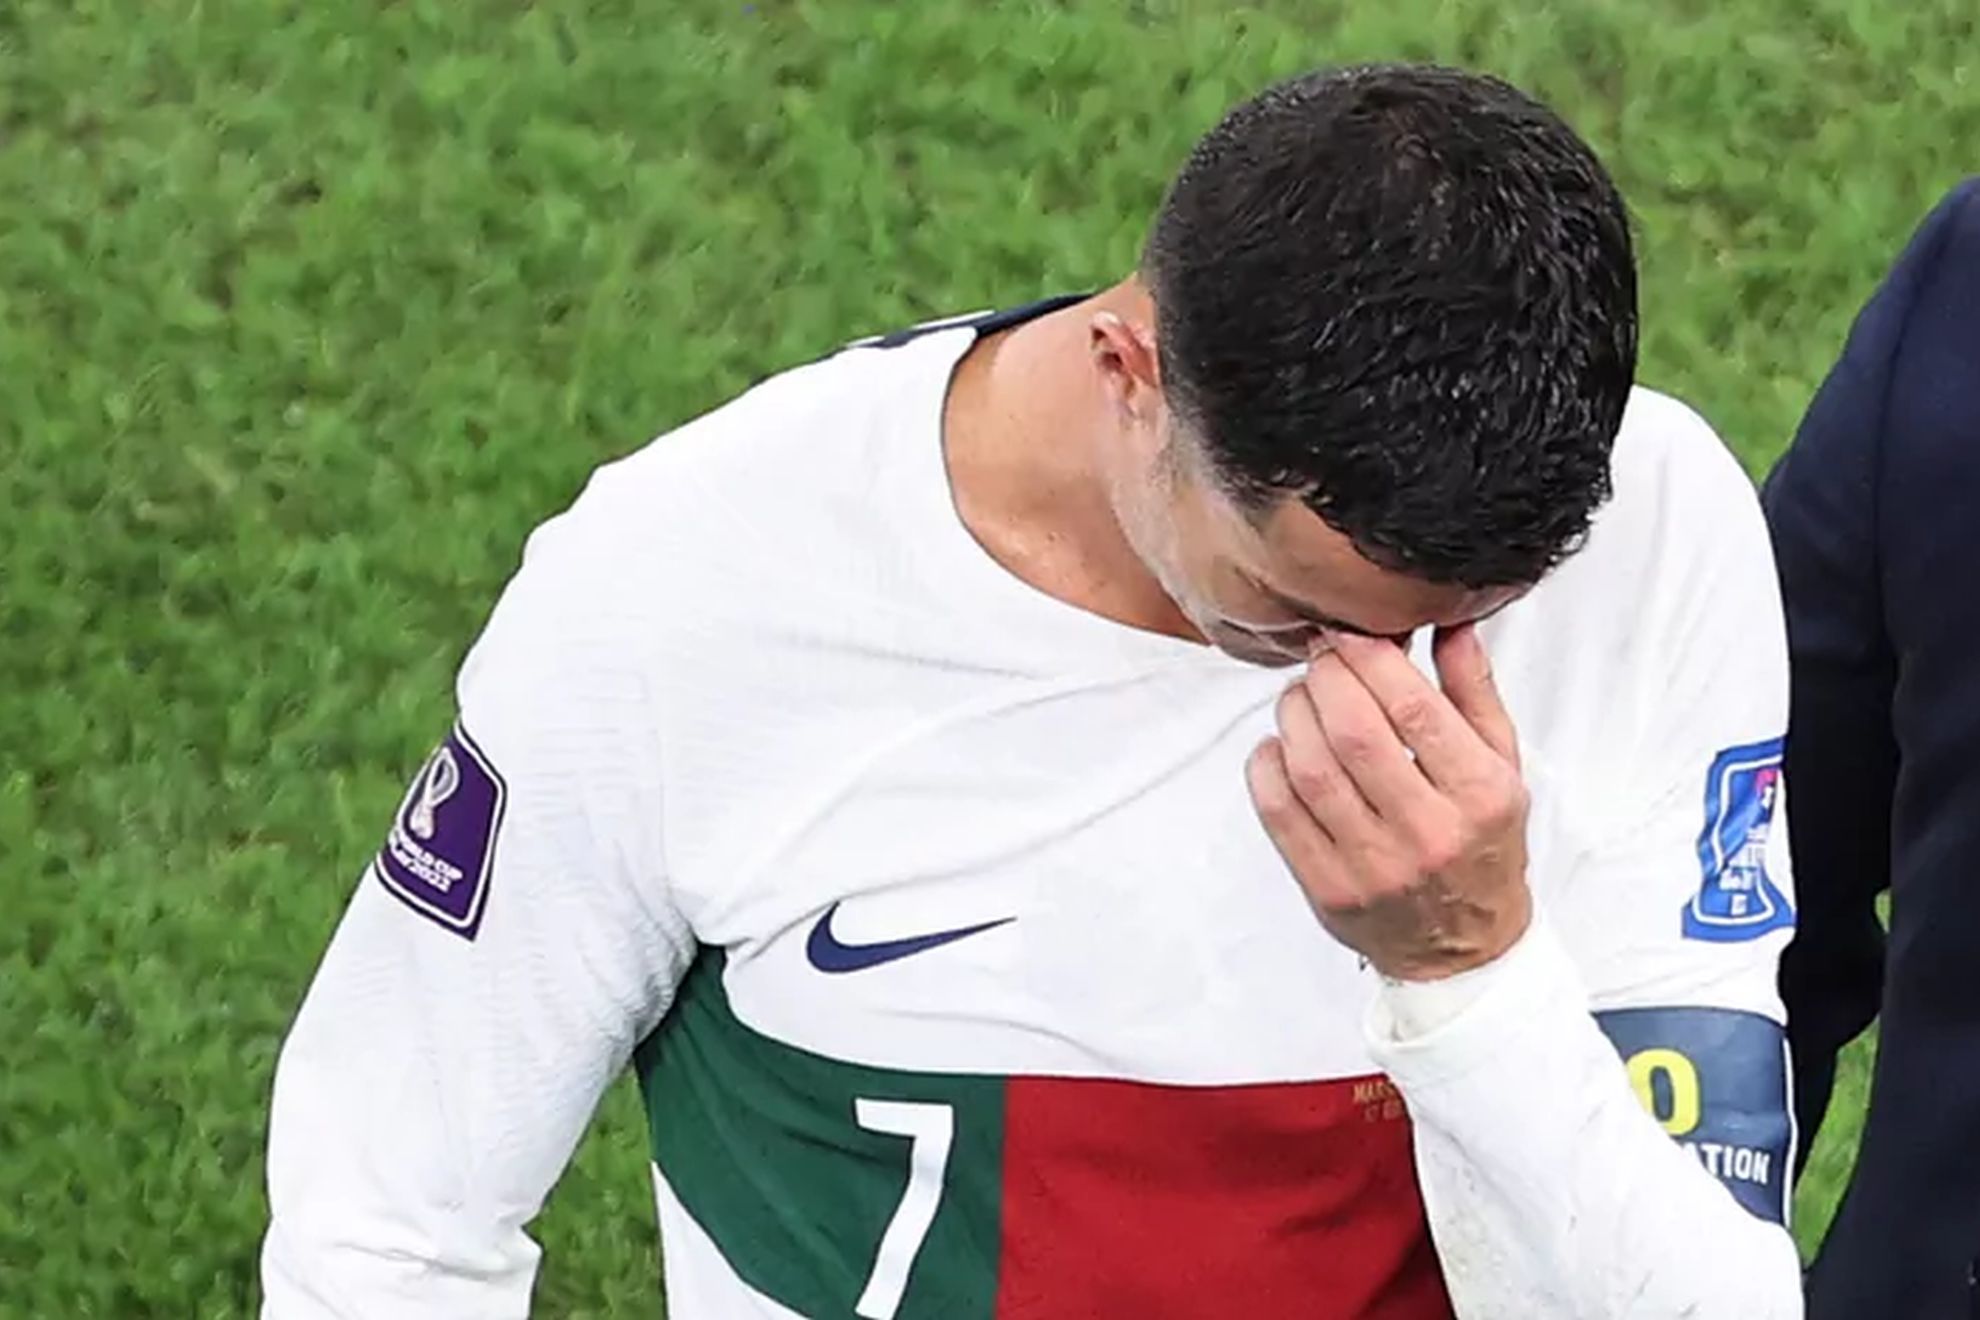 Cristiano Ronaldo's tears after Portugal's World Cup elimination